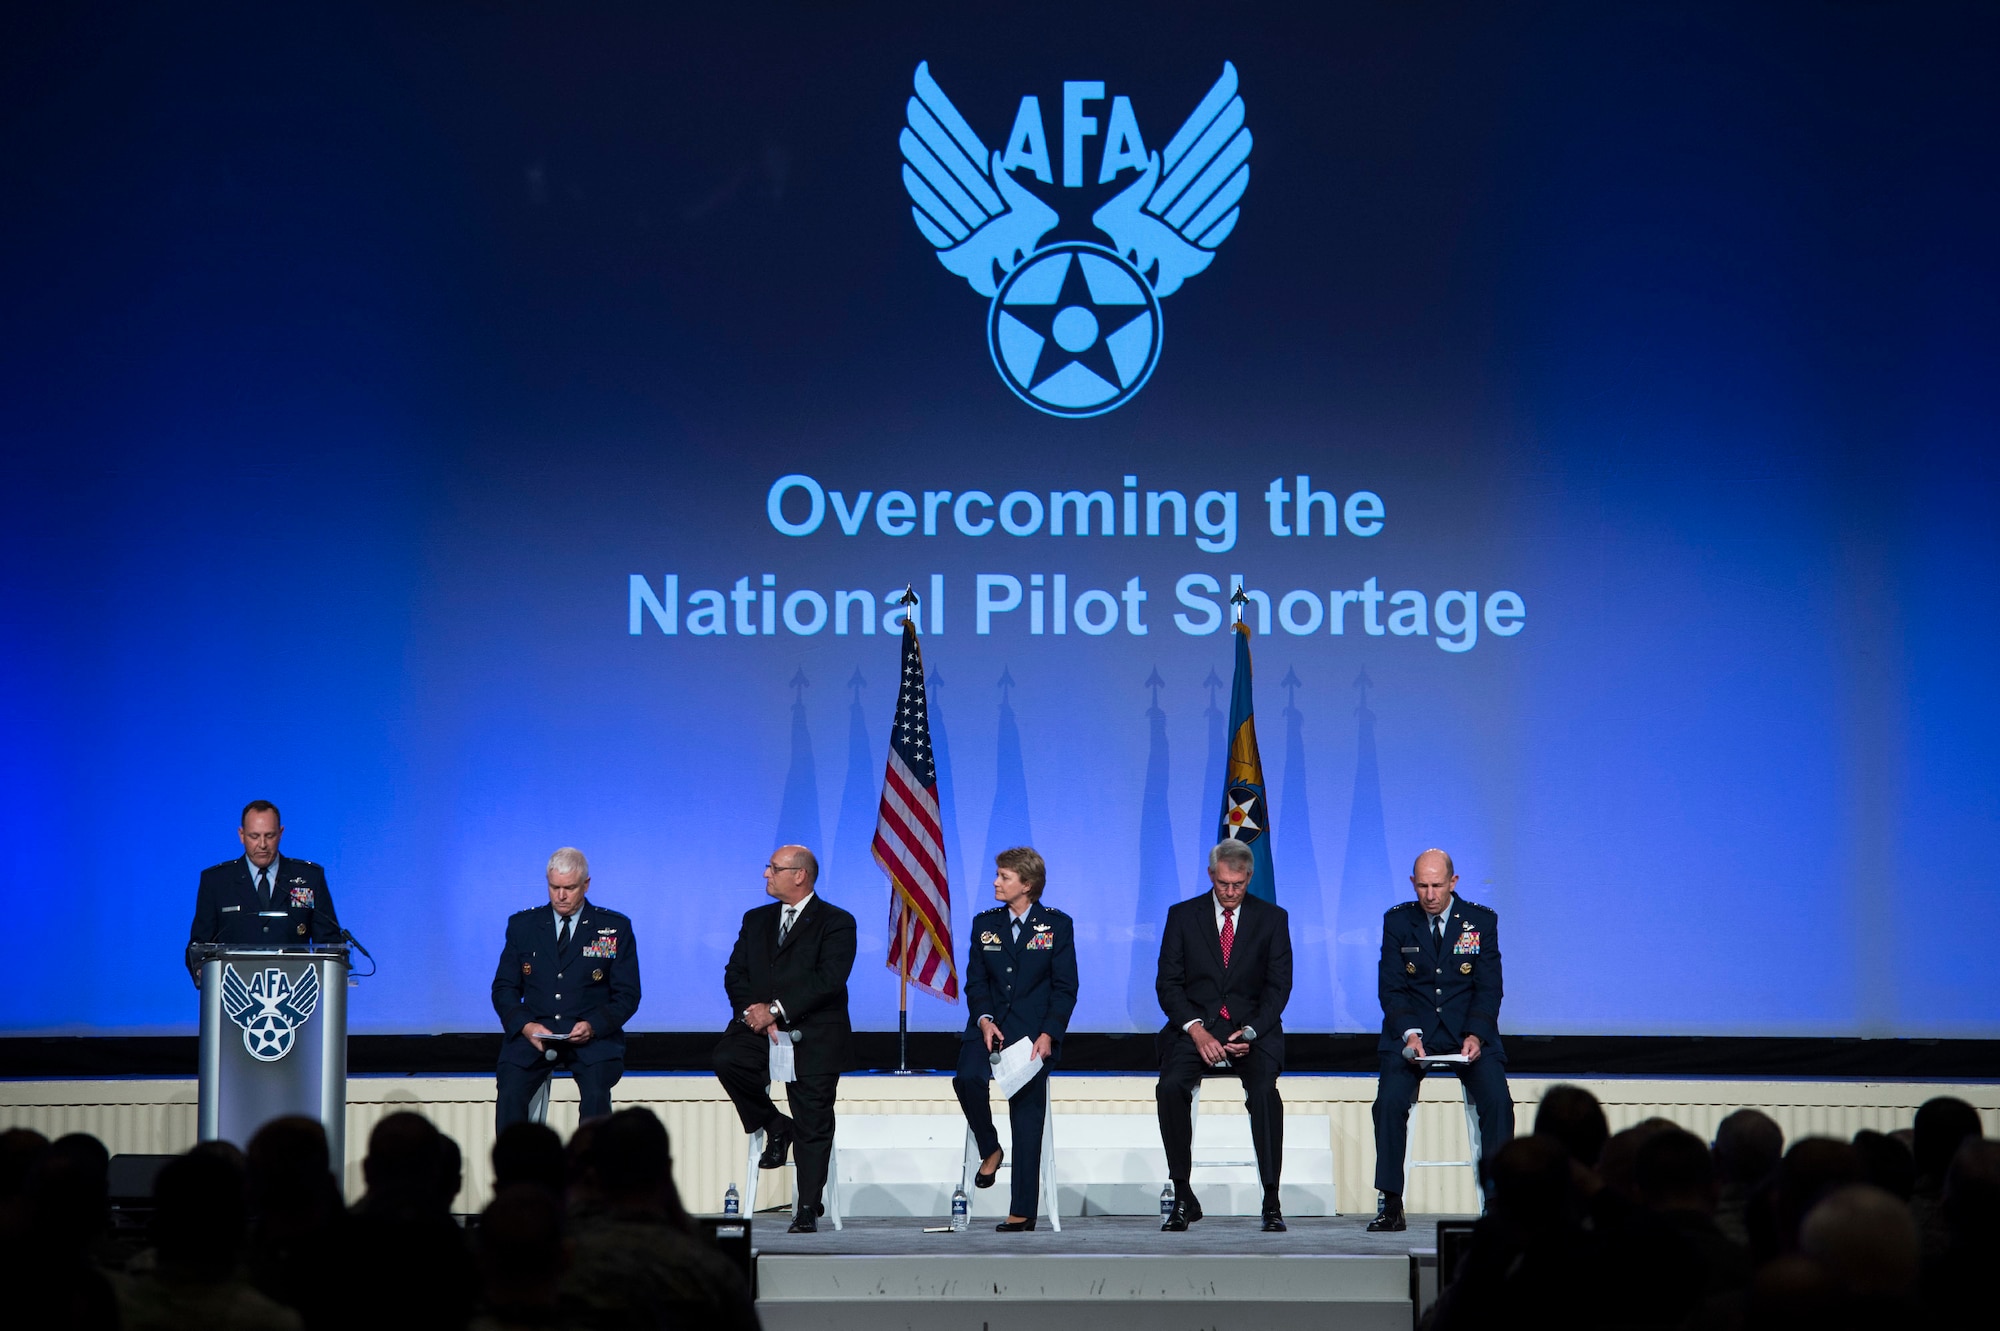 Gen. James M. Holmes, Air Combat Command commander, talks about overcoming the national pilot shortage during the Air Force Association’s Air, Space and Cyber Conference in National Harbor, Md., Sept. 18, 2018. The ASC18 is a professional development conference that offers an opportunity for Department of Defense personnel to participate in forums, speeches, seminars and workshops. (U.S. Air Force photo by Tech. Sgt. DeAndre Curtiss)